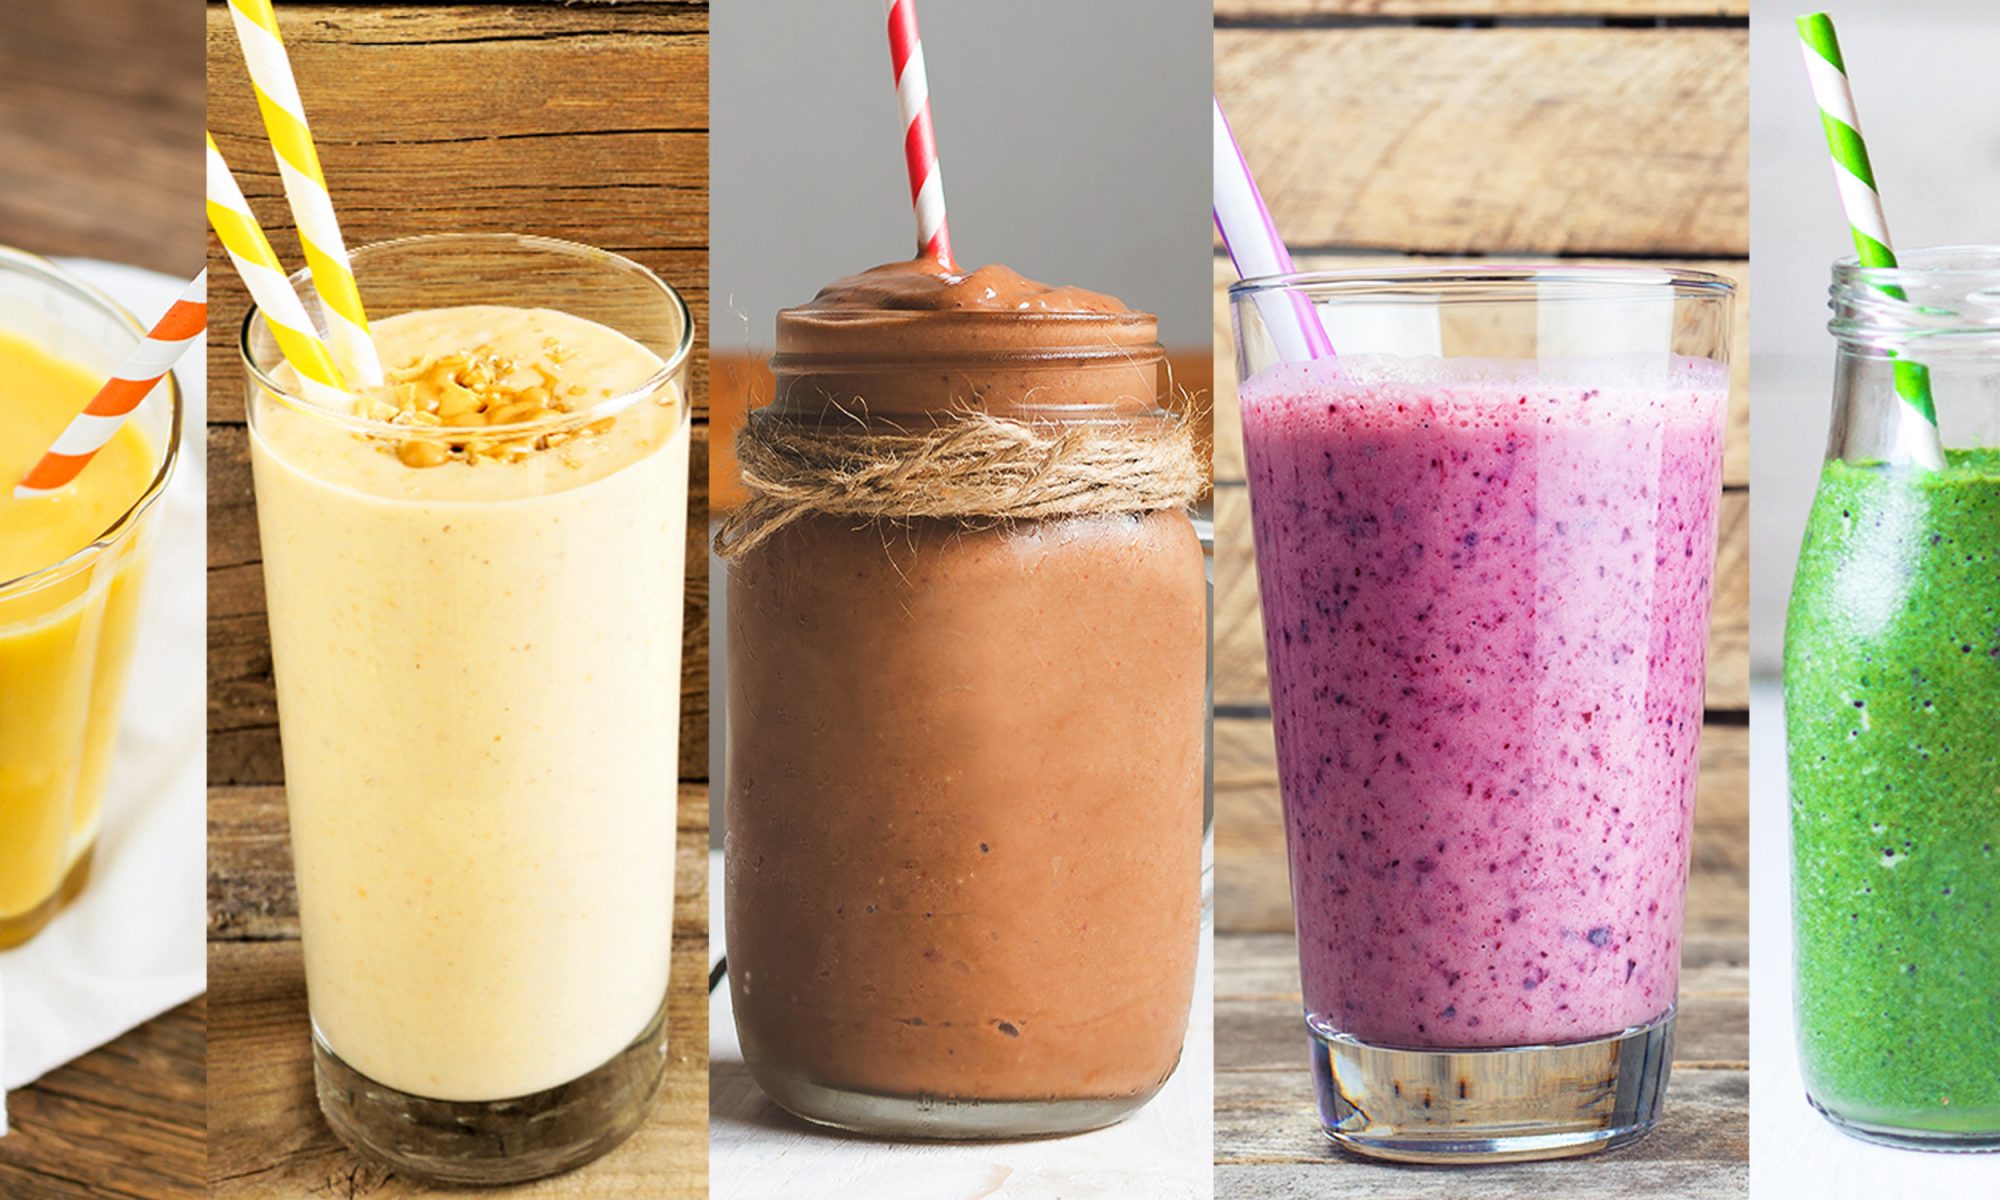 EC: 5 Easy Smoothie Recipes with Only 5 Ingredients